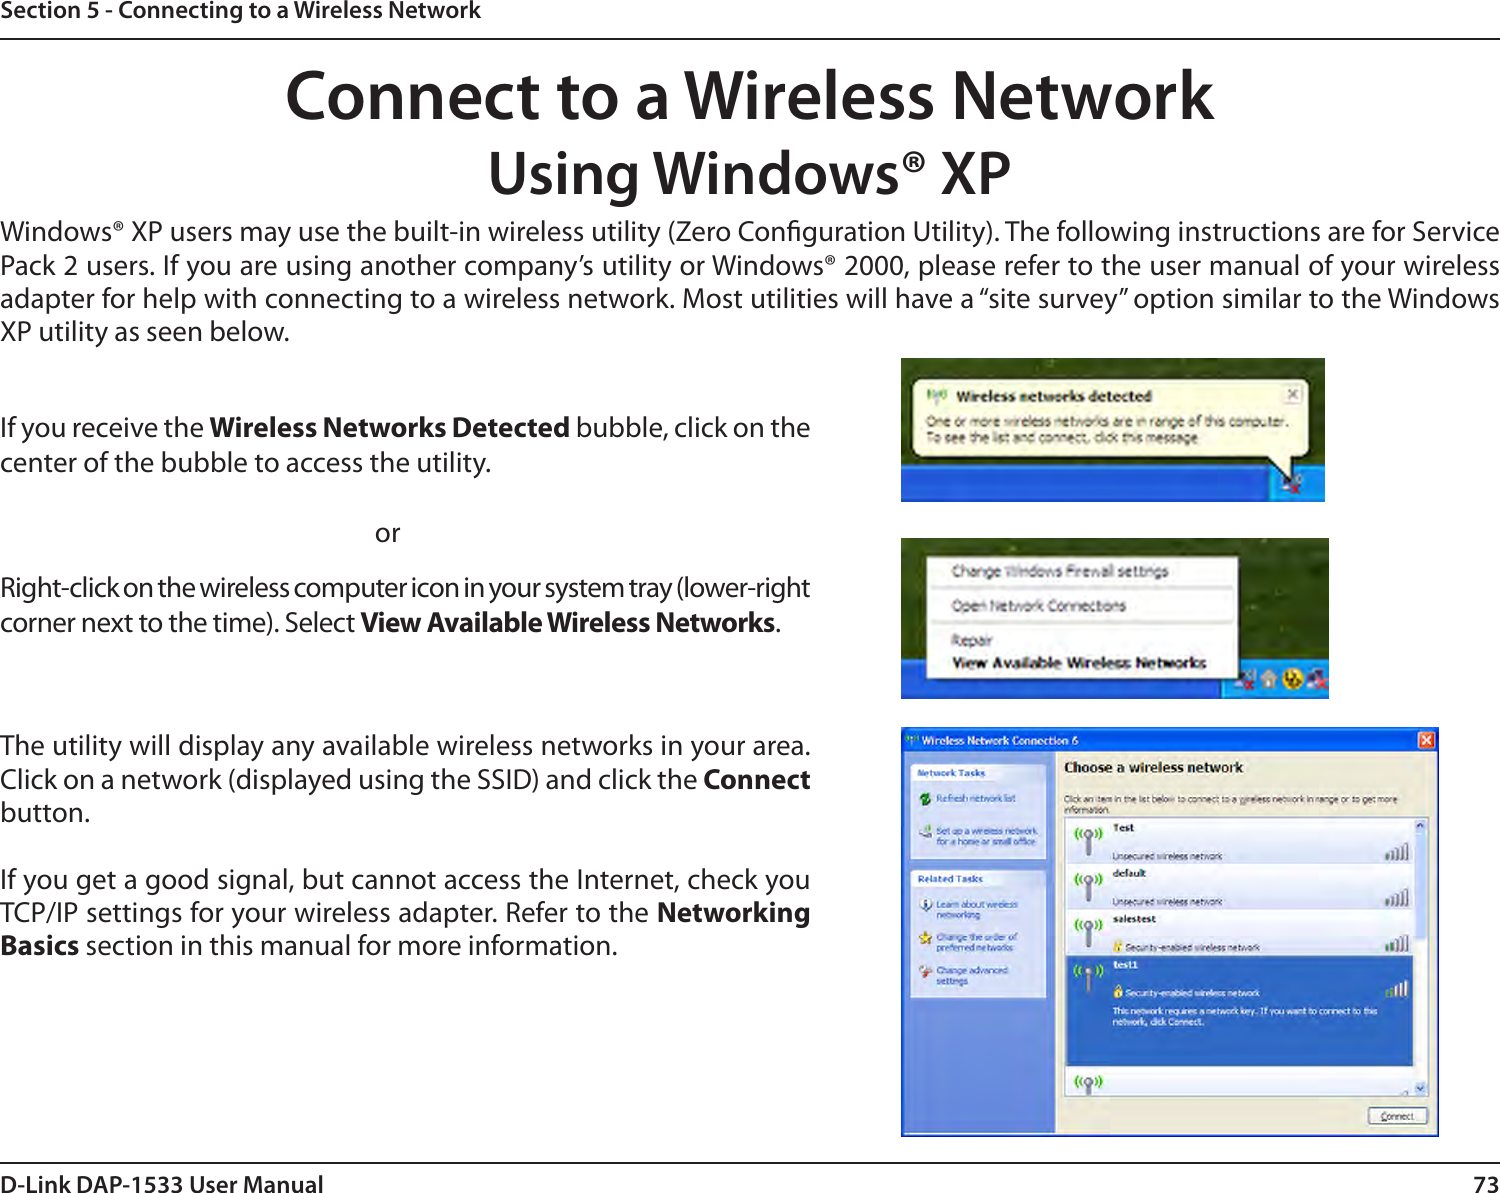 73D-Link DAP-1533 User ManualSection 5 - Connecting to a Wireless NetworkConnect to a Wireless NetworkUsing Windows® XPWindows® XP users may use the built-in wireless utility (Zero Conguration Utility). The following instructions are for Service Pack 2 users. If you are using another company’s utility or Windows® 2000, please refer to the user manual of your wireless adapter for help with connecting to a wireless network. Most utilities will have a “site survey” option similar to the Windows XP utility as seen below.Right-click on the wireless computer icon in your system tray (lower-right corner next to the time). Select View Available Wireless Networks.If you receive the Wireless Networks Detected bubble, click on the center of the bubble to access the utility.     orThe utility will display any available wireless networks in your area. Click on a network (displayed using the SSID) and click the Connect button.If you get a good signal, but cannot access the Internet, check you TCP/IP settings for your wireless adapter. Refer to the Networking Basics section in this manual for more information.